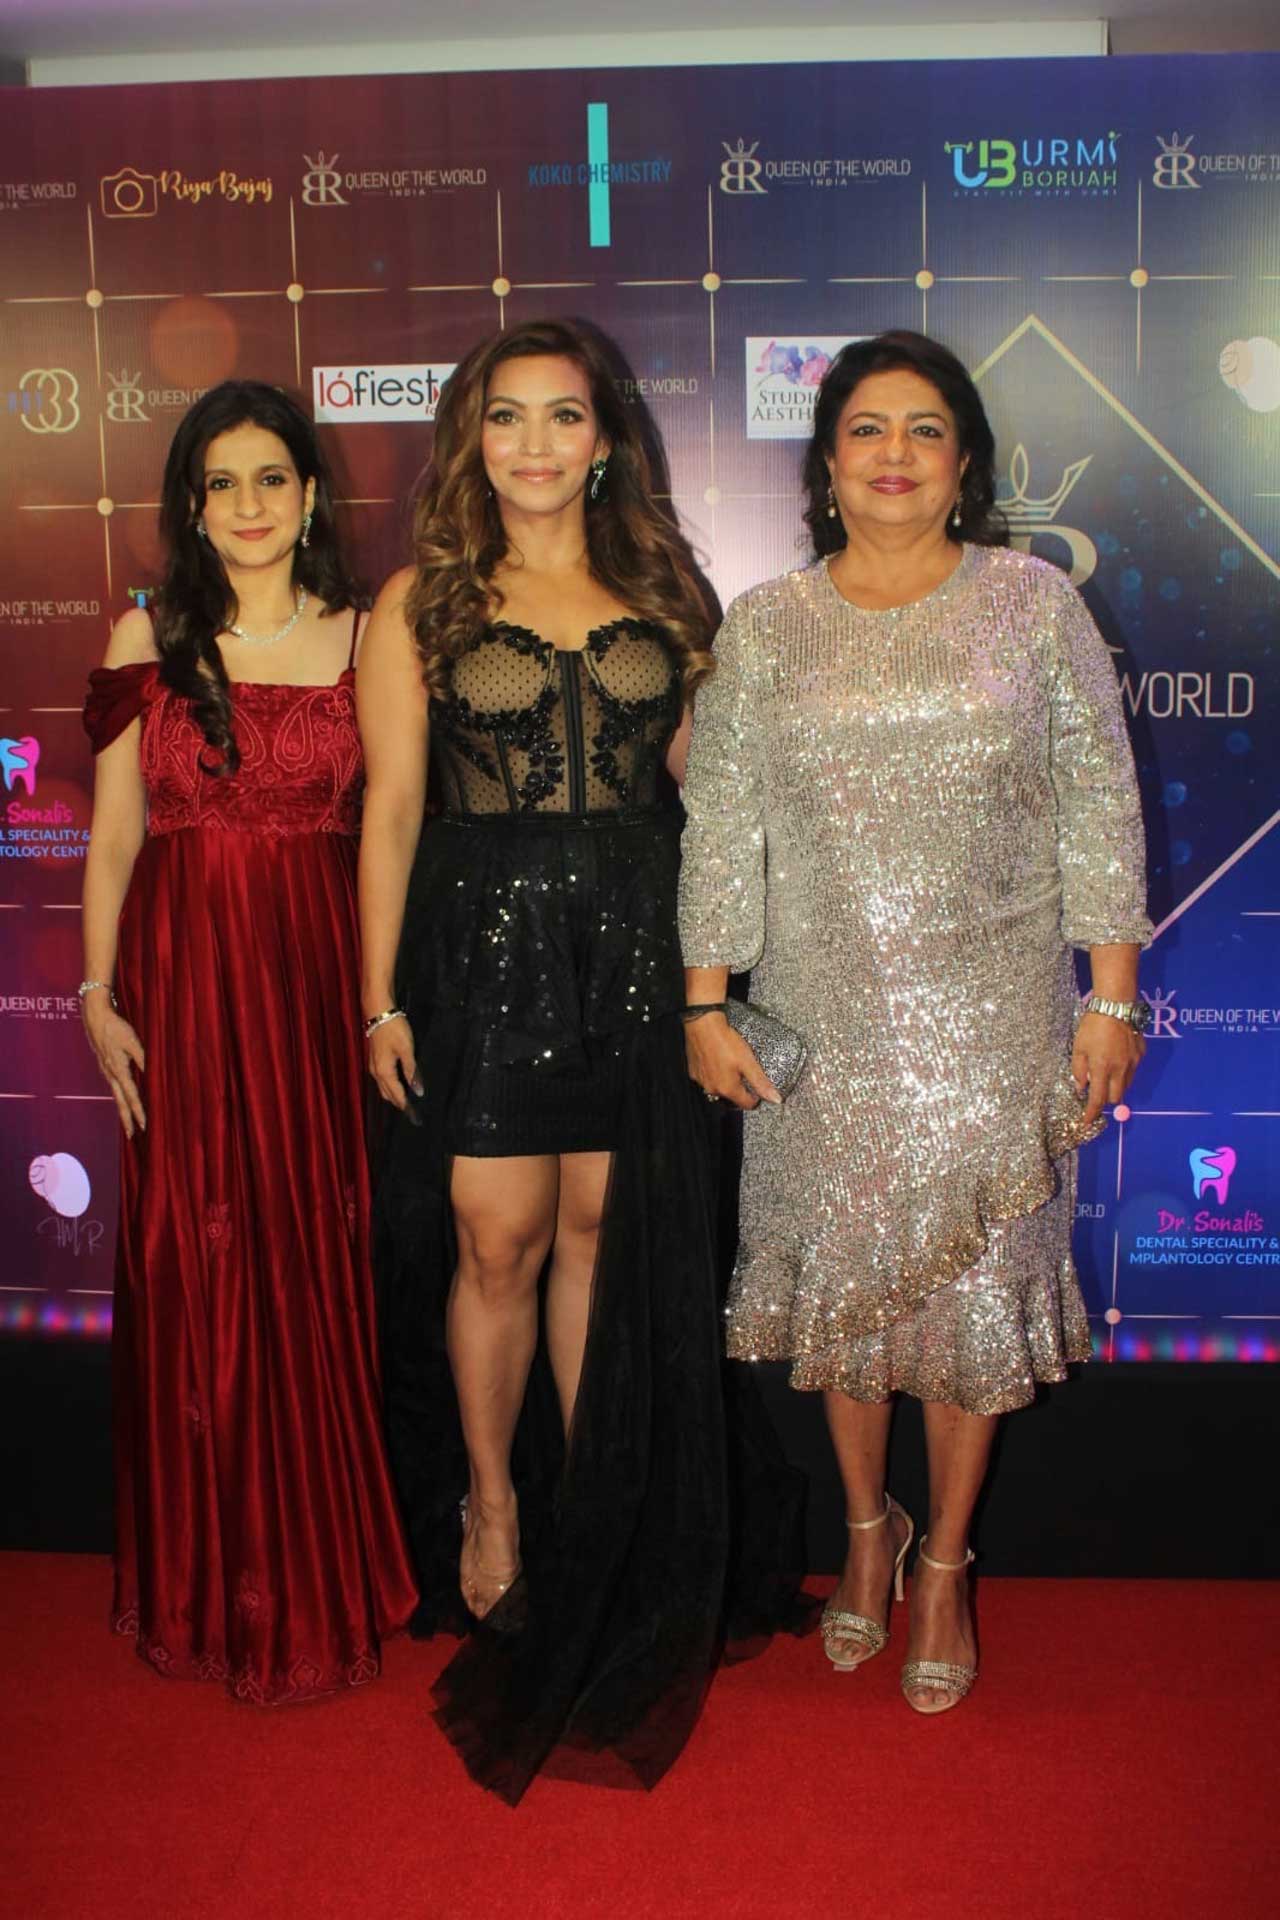 The event, which is set to be held in January 2022 in the USA, also promotes diversity and inclusion as it provides a platform to break the stereotypes of conventional age restrictions in the space of pageants. Seen here is Priyanka Chopra's mother Madhu Chopra with host Urmimala Boruah.